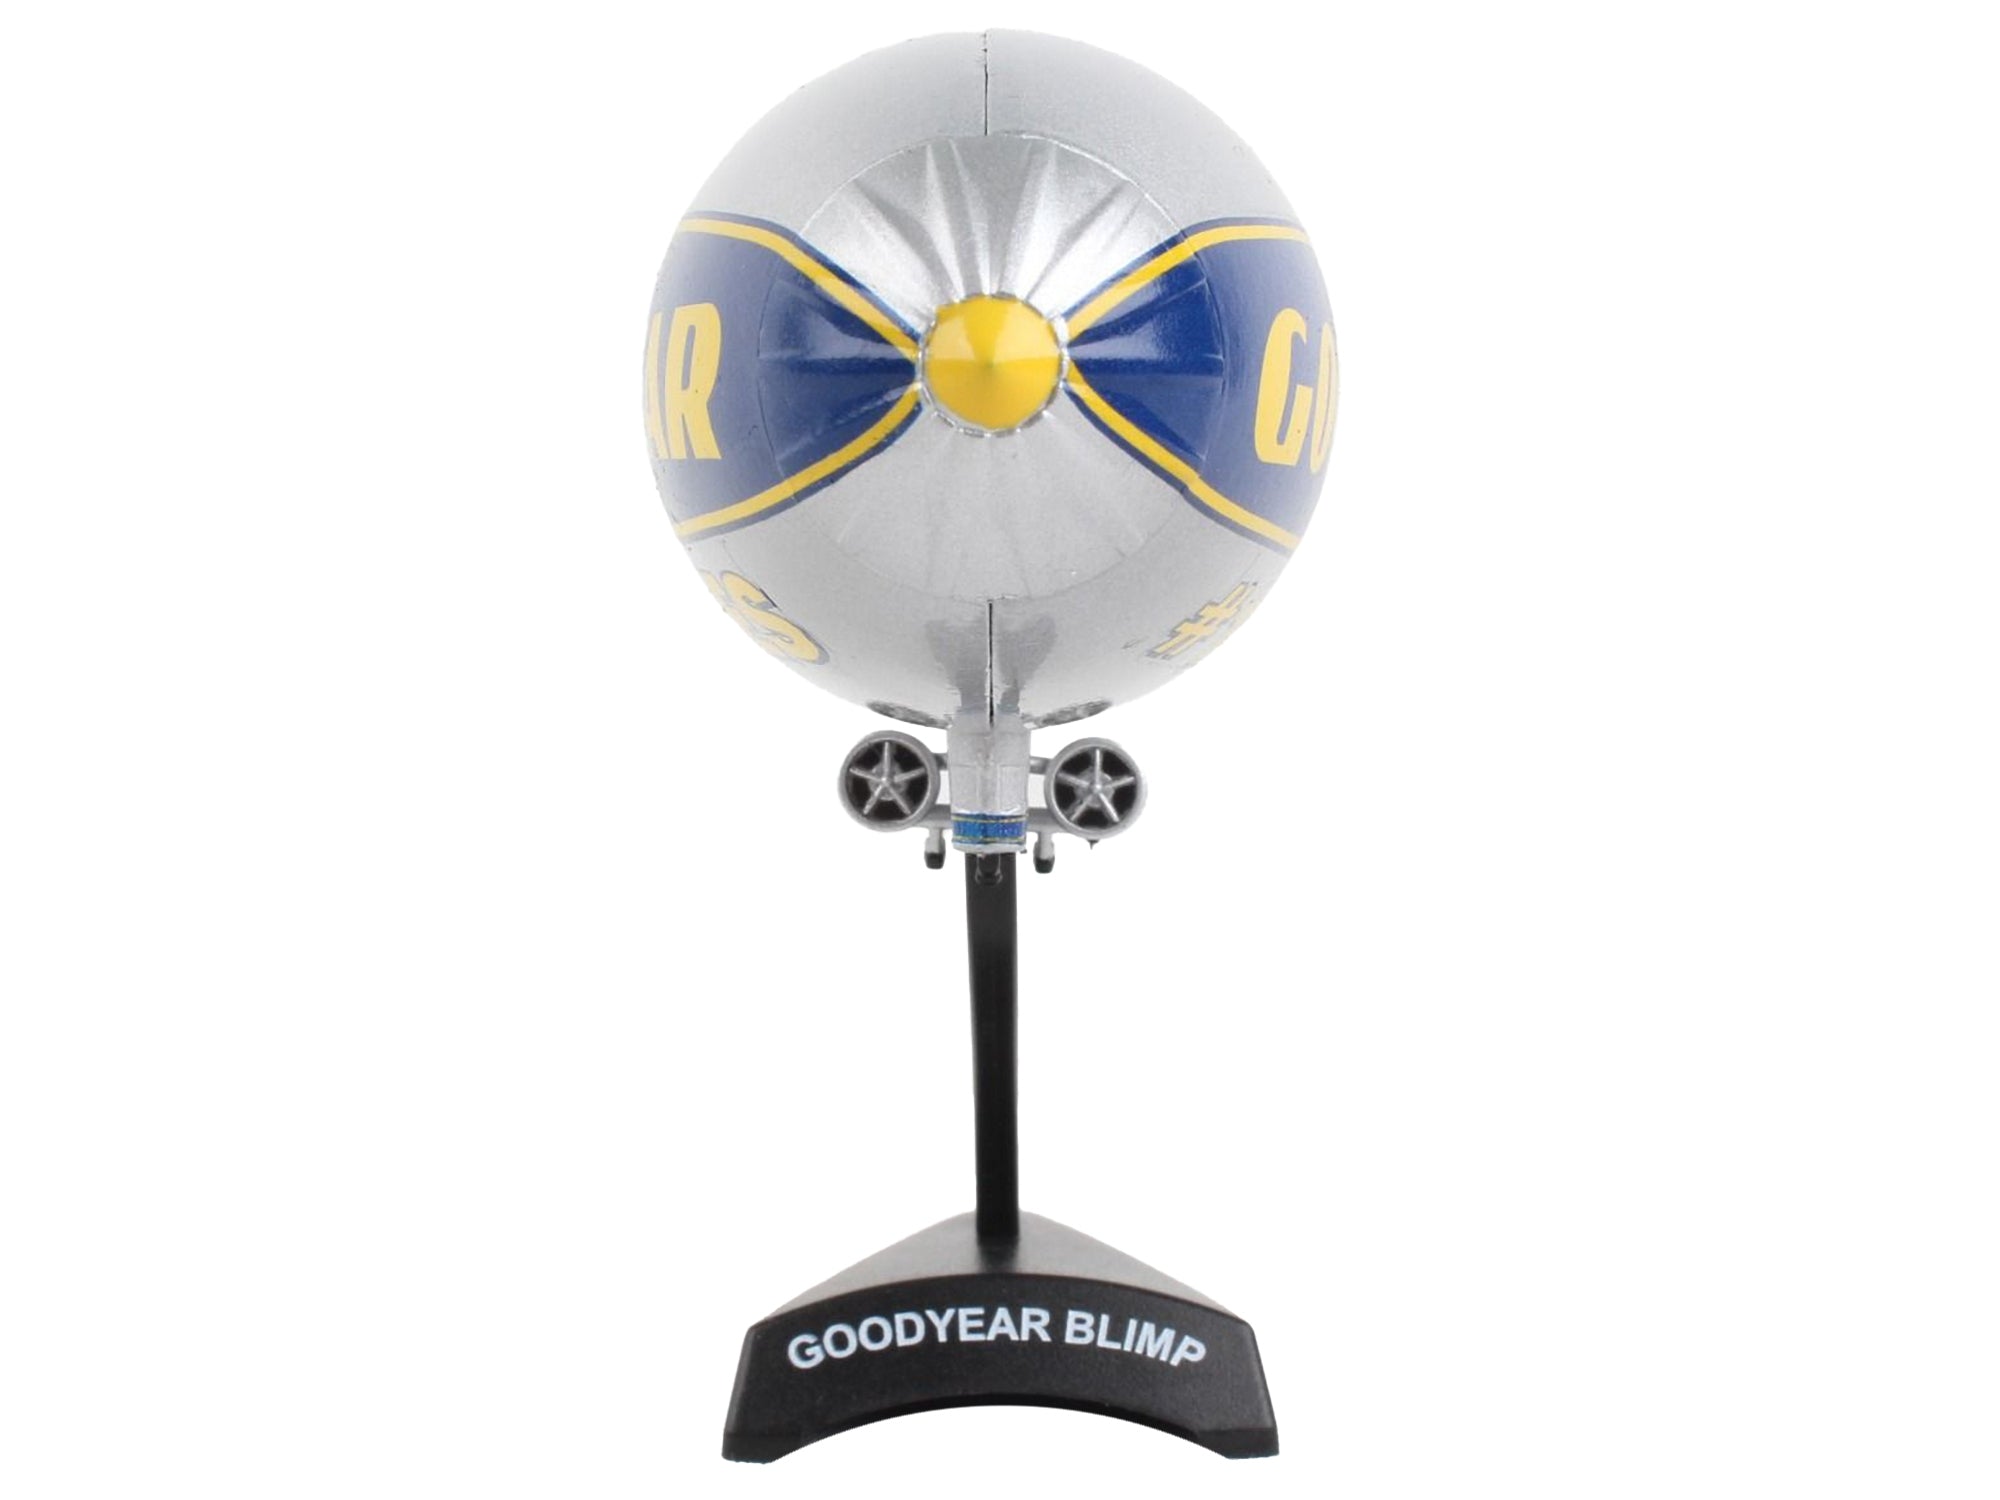 Goodyear Blimp Silver Metallic with Blue and Yellow Graphics "#1 in Tires" 1/350 Diecast Model Airplane by Postage Stamp